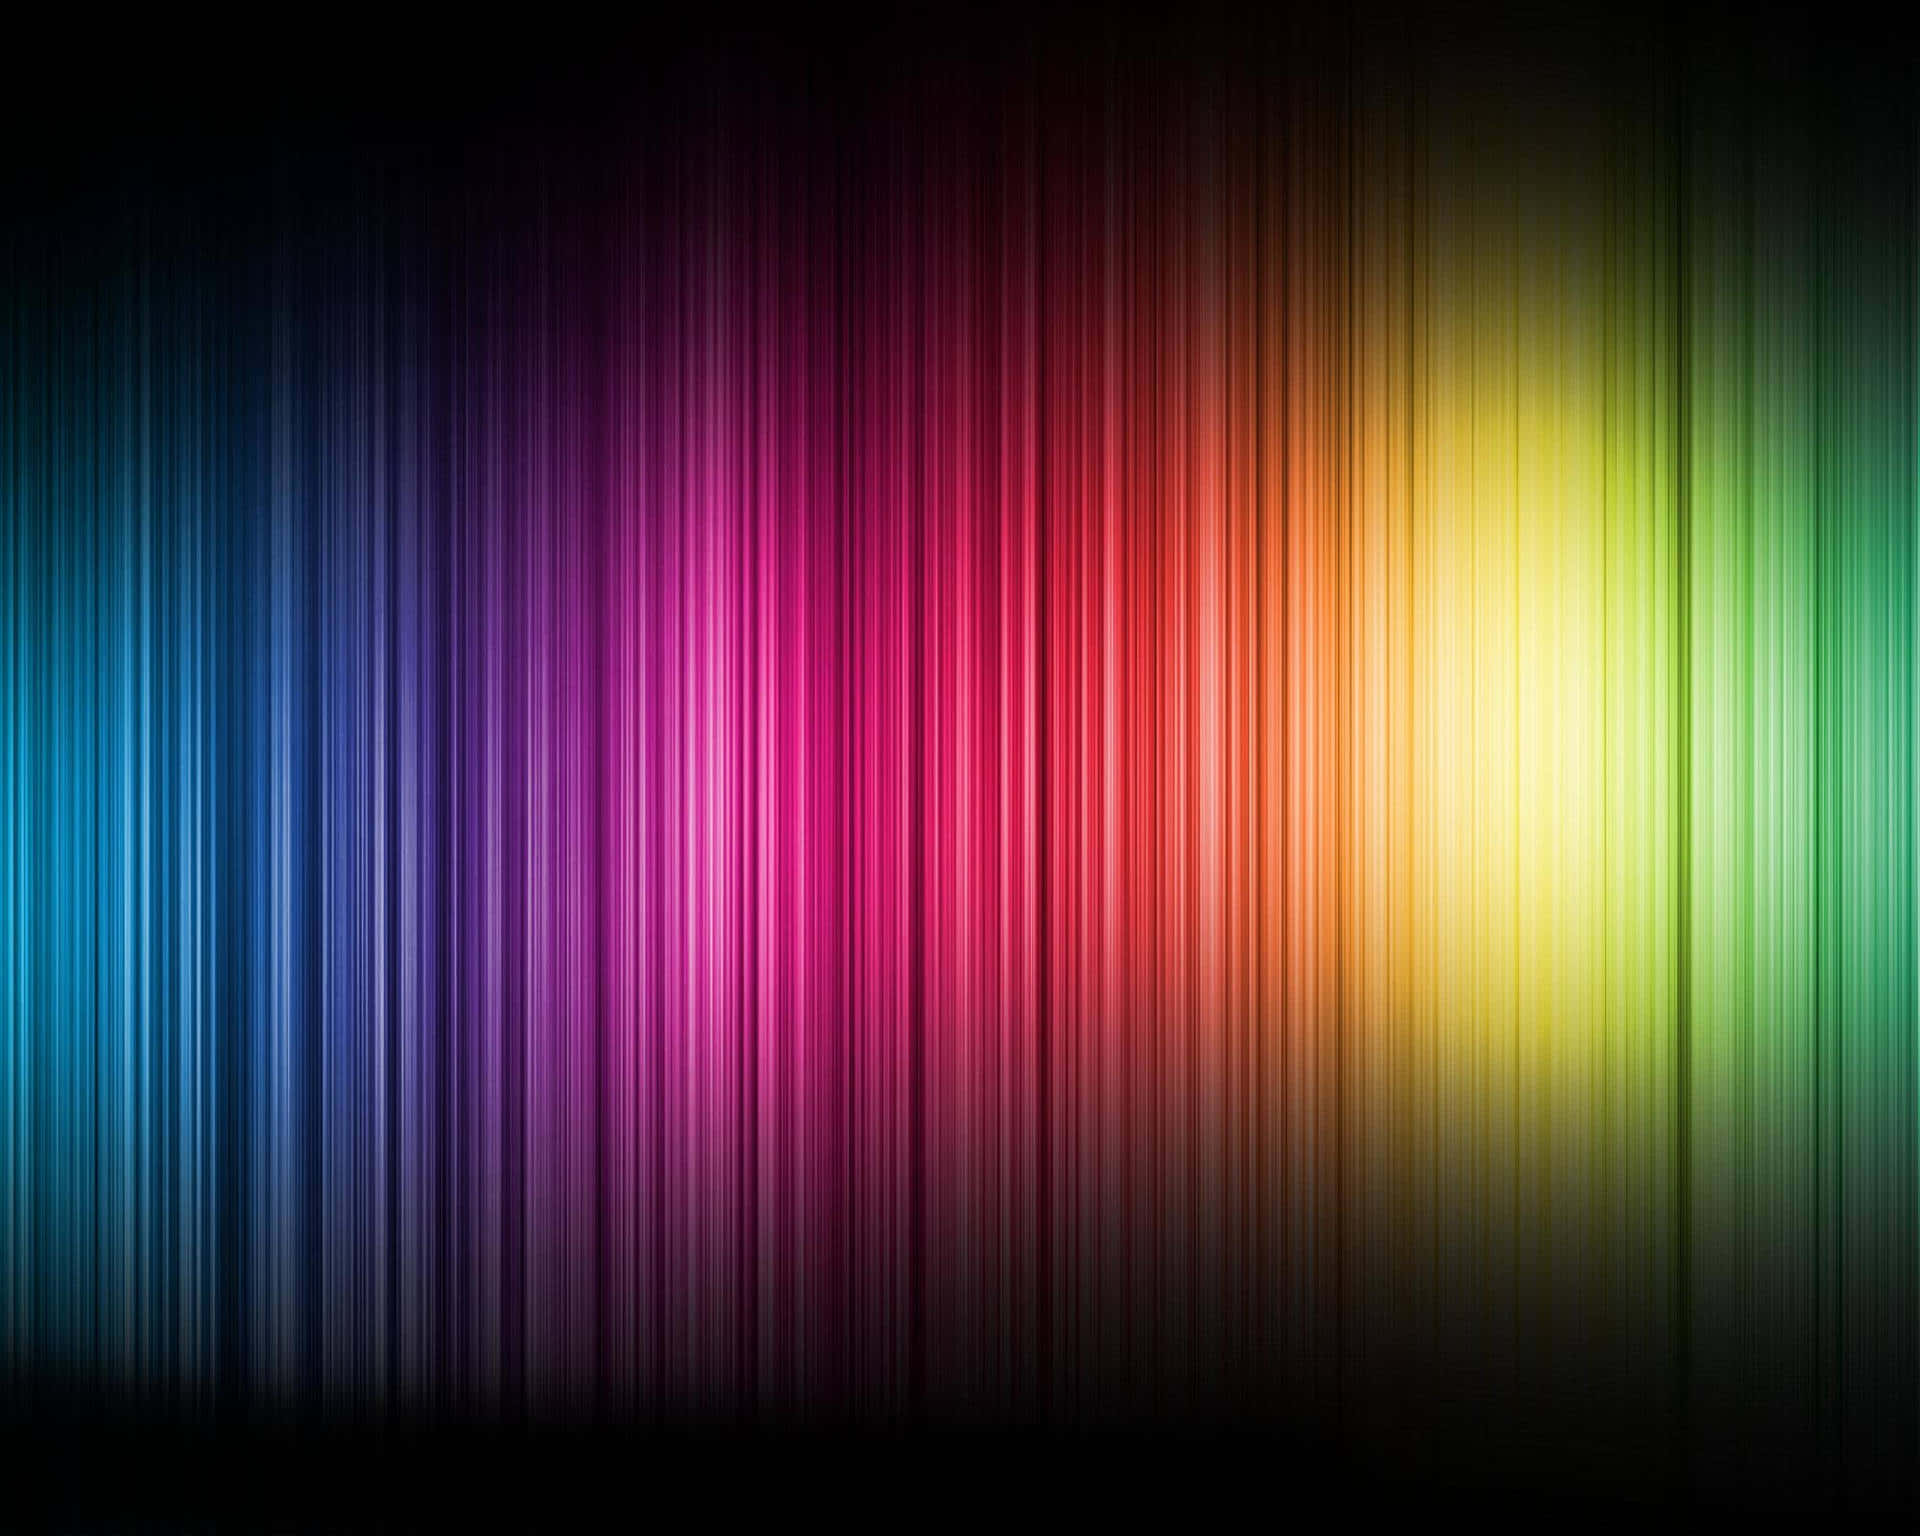 “Discover the Vivid Colors of the Spectrum.”